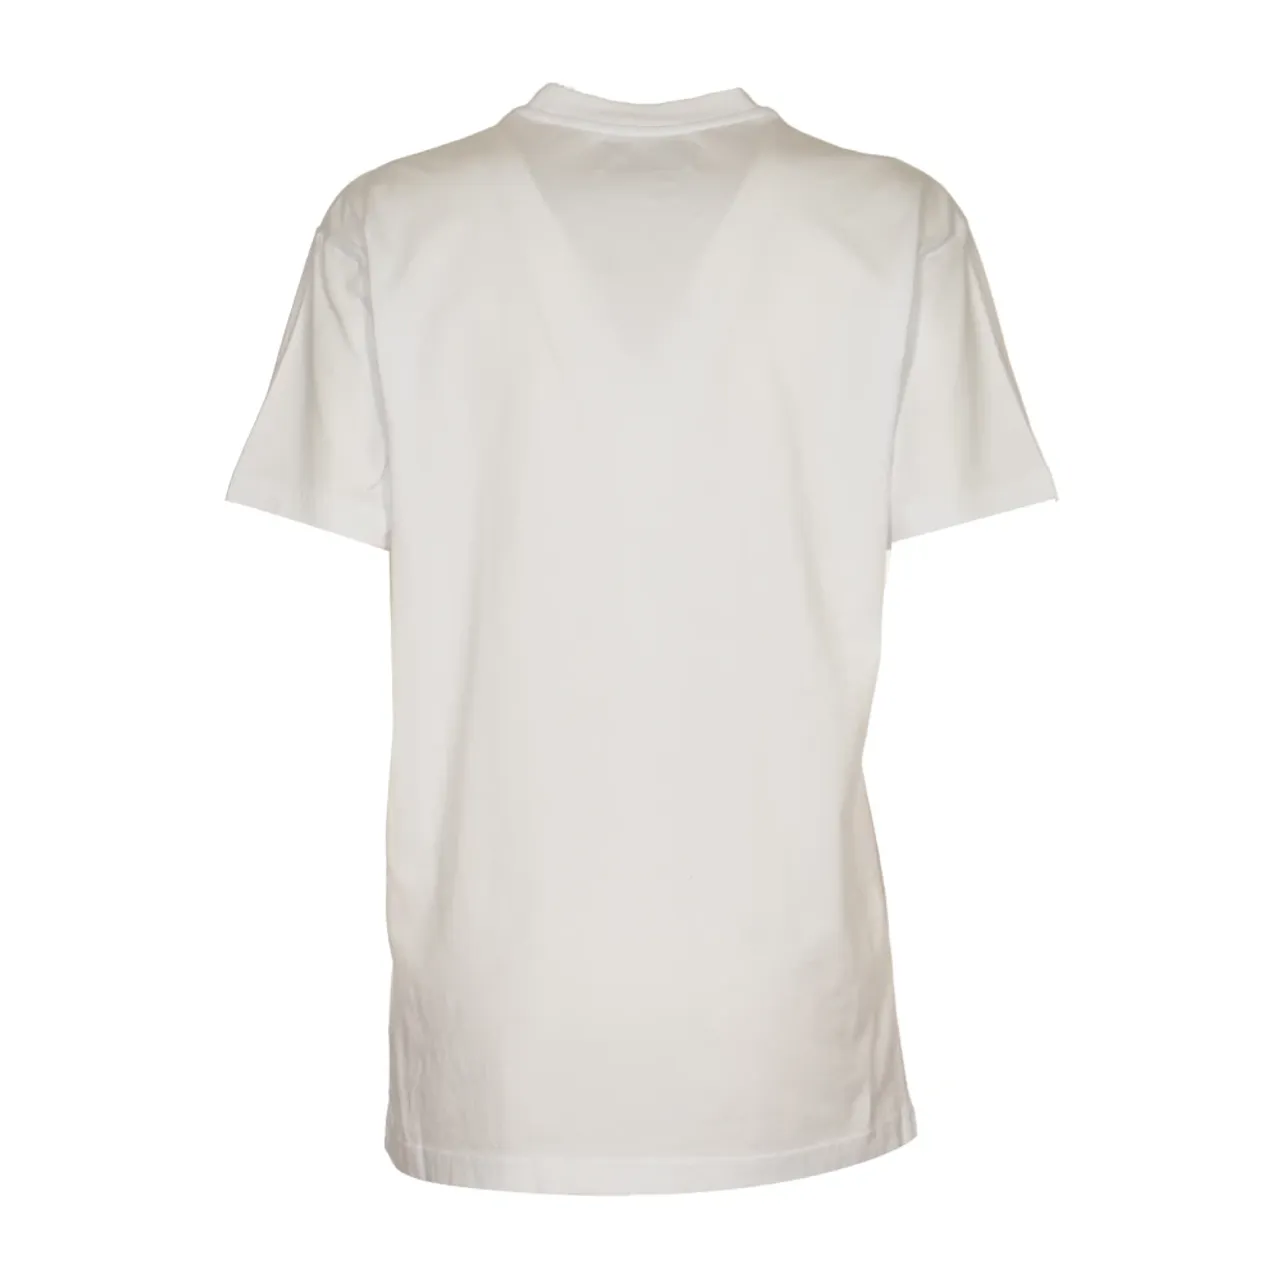 Vivienne Westwood , Classic Multicolor Orb T-shirts and Polos ,White female, Sizes: